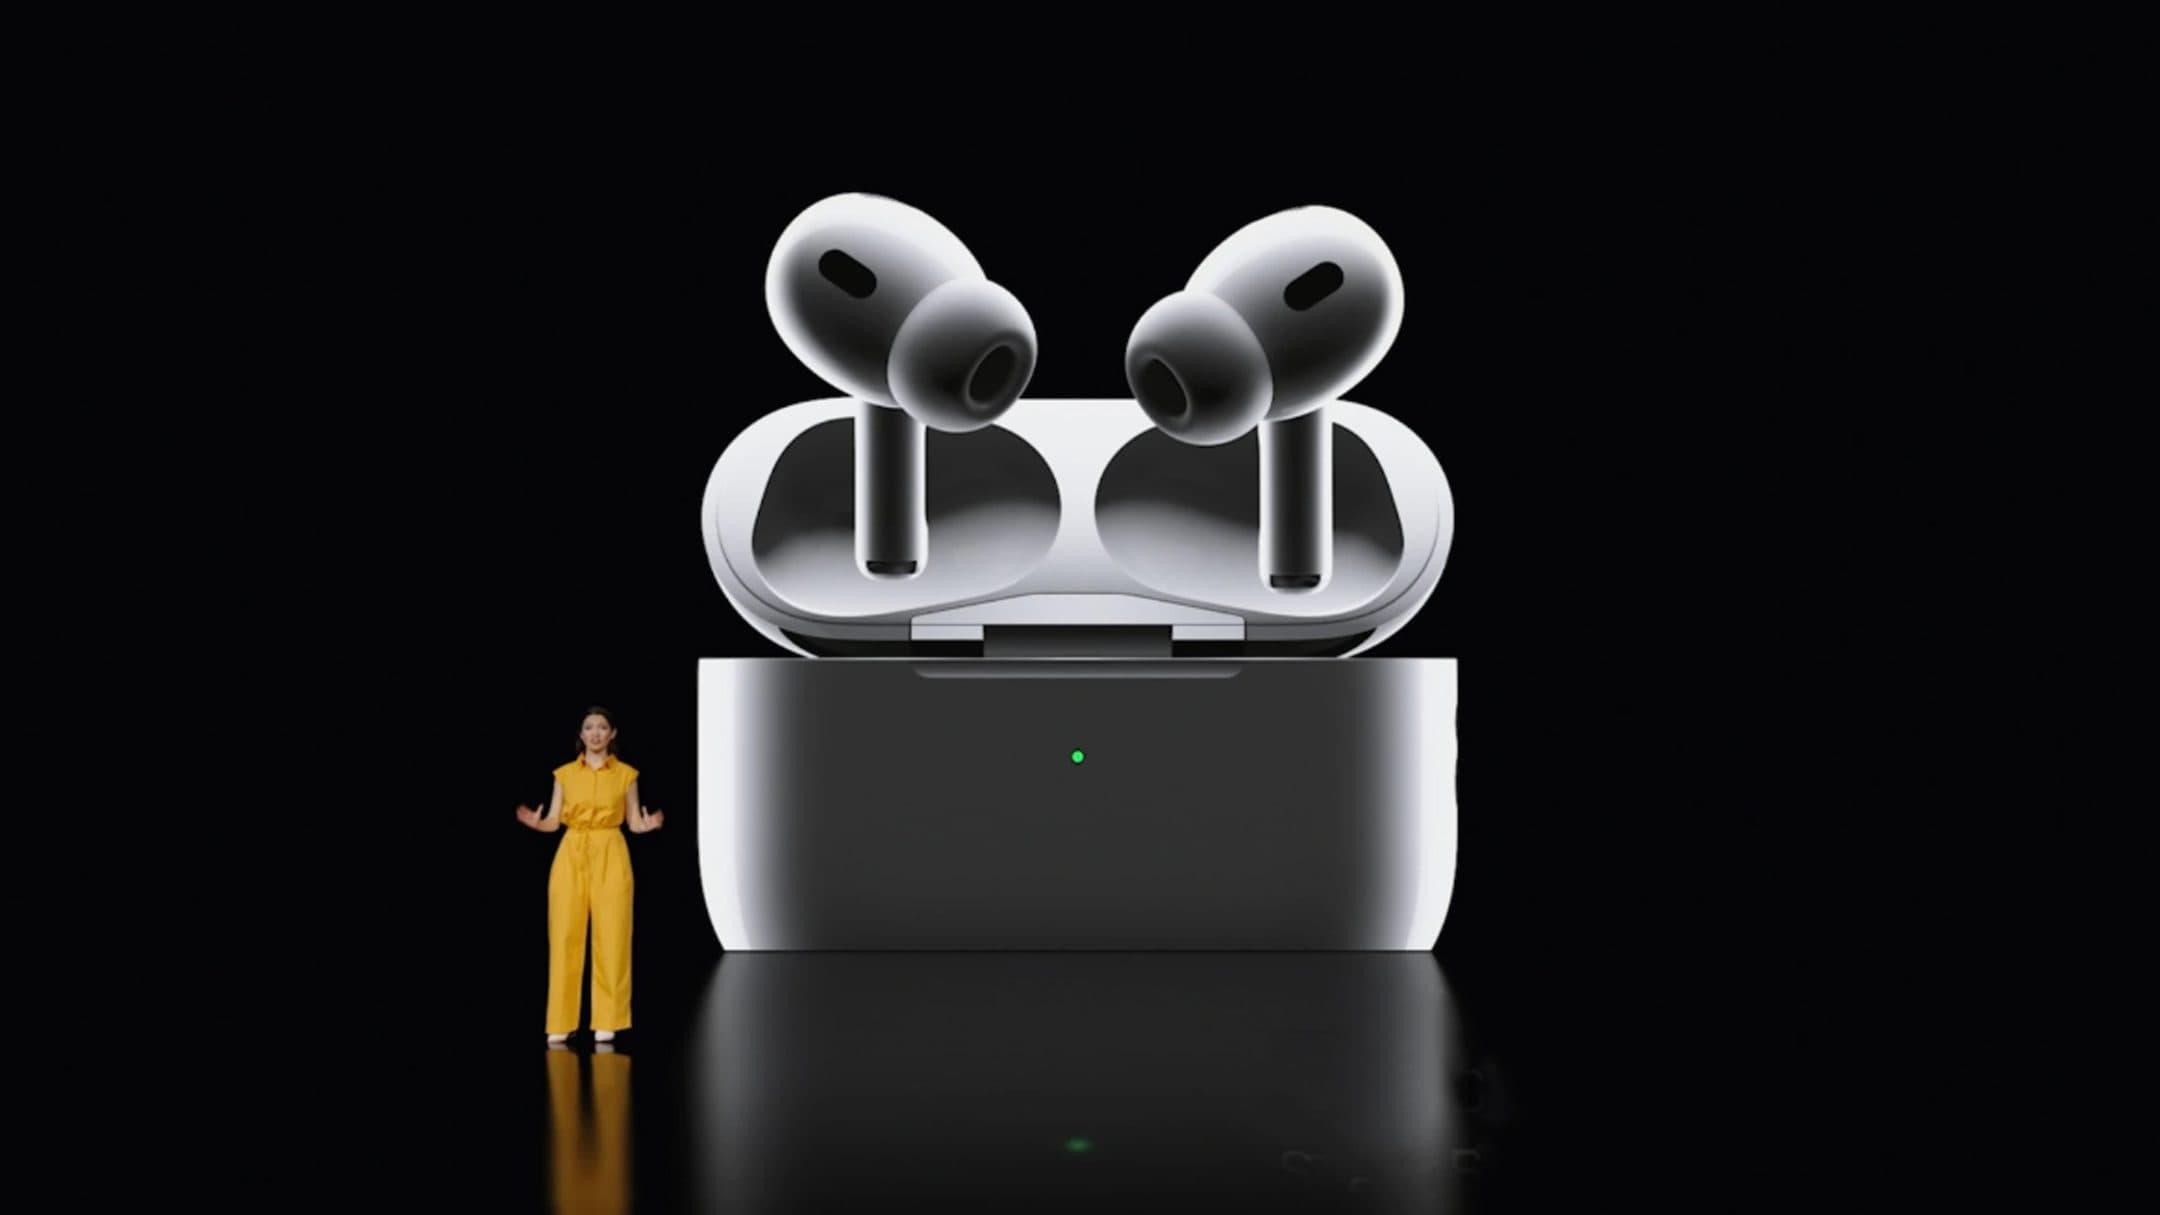 Apple onthult AirPods Pro 2-oordopjes